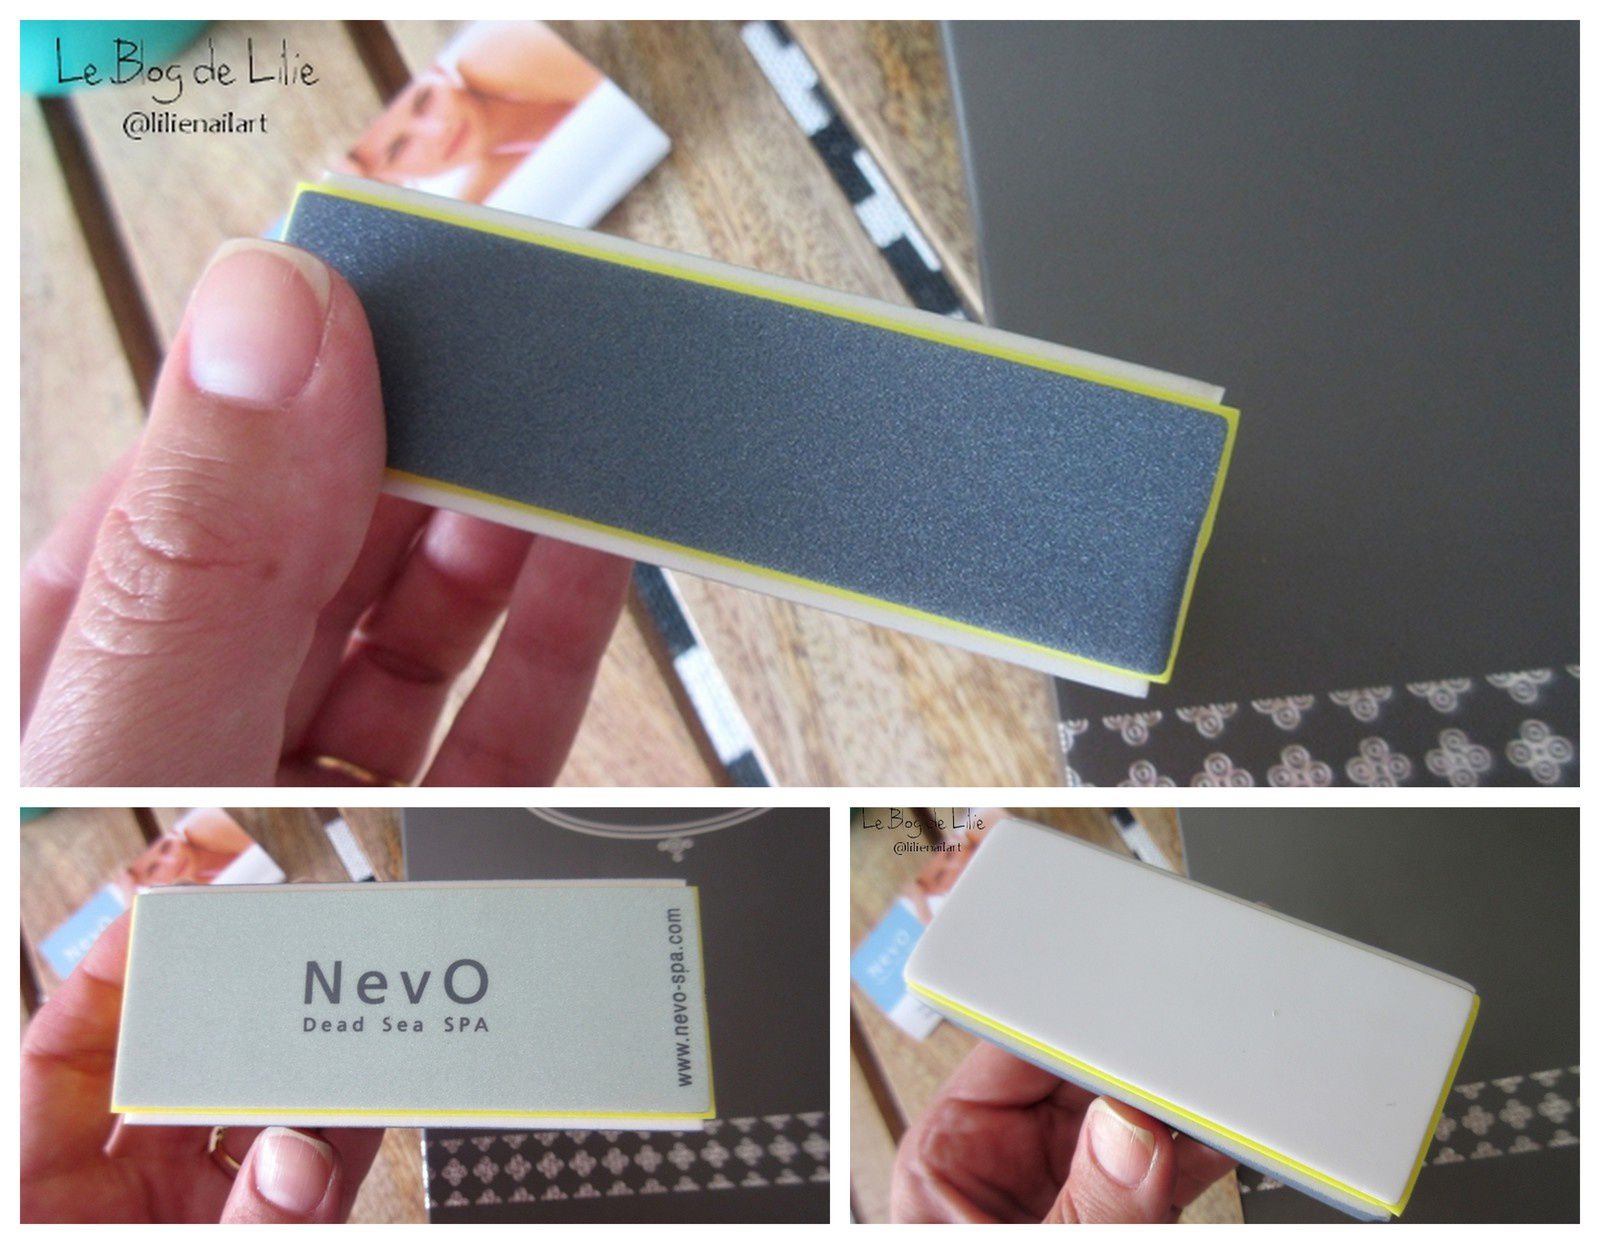 Deluxe Nail Care Kit by NevO - Dead Sea SPA